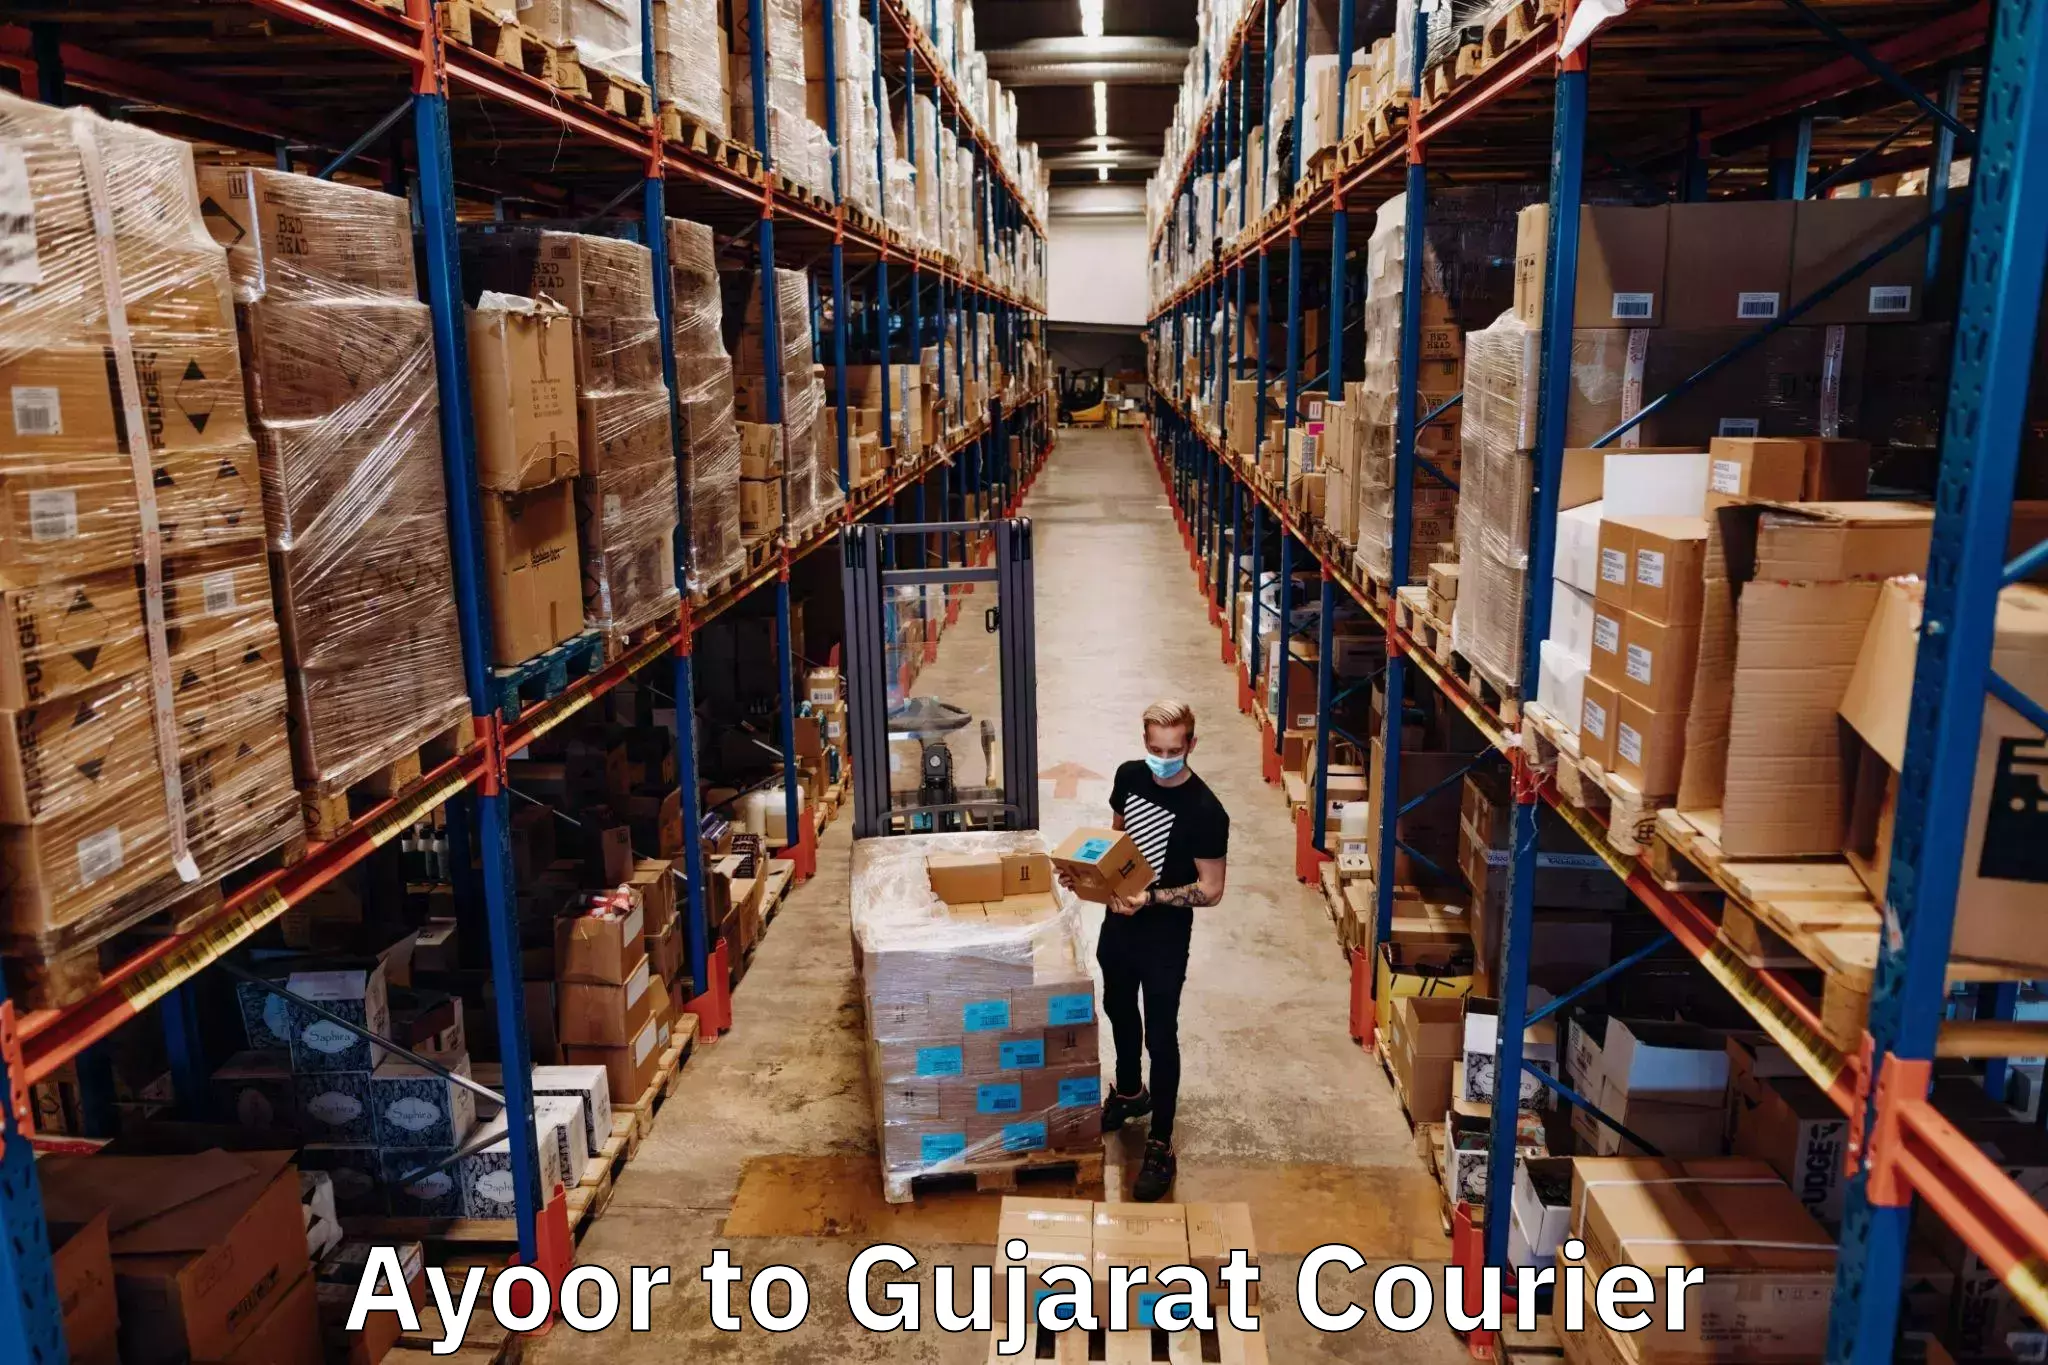 Customer-oriented courier services Ayoor to Anand Agricultural University